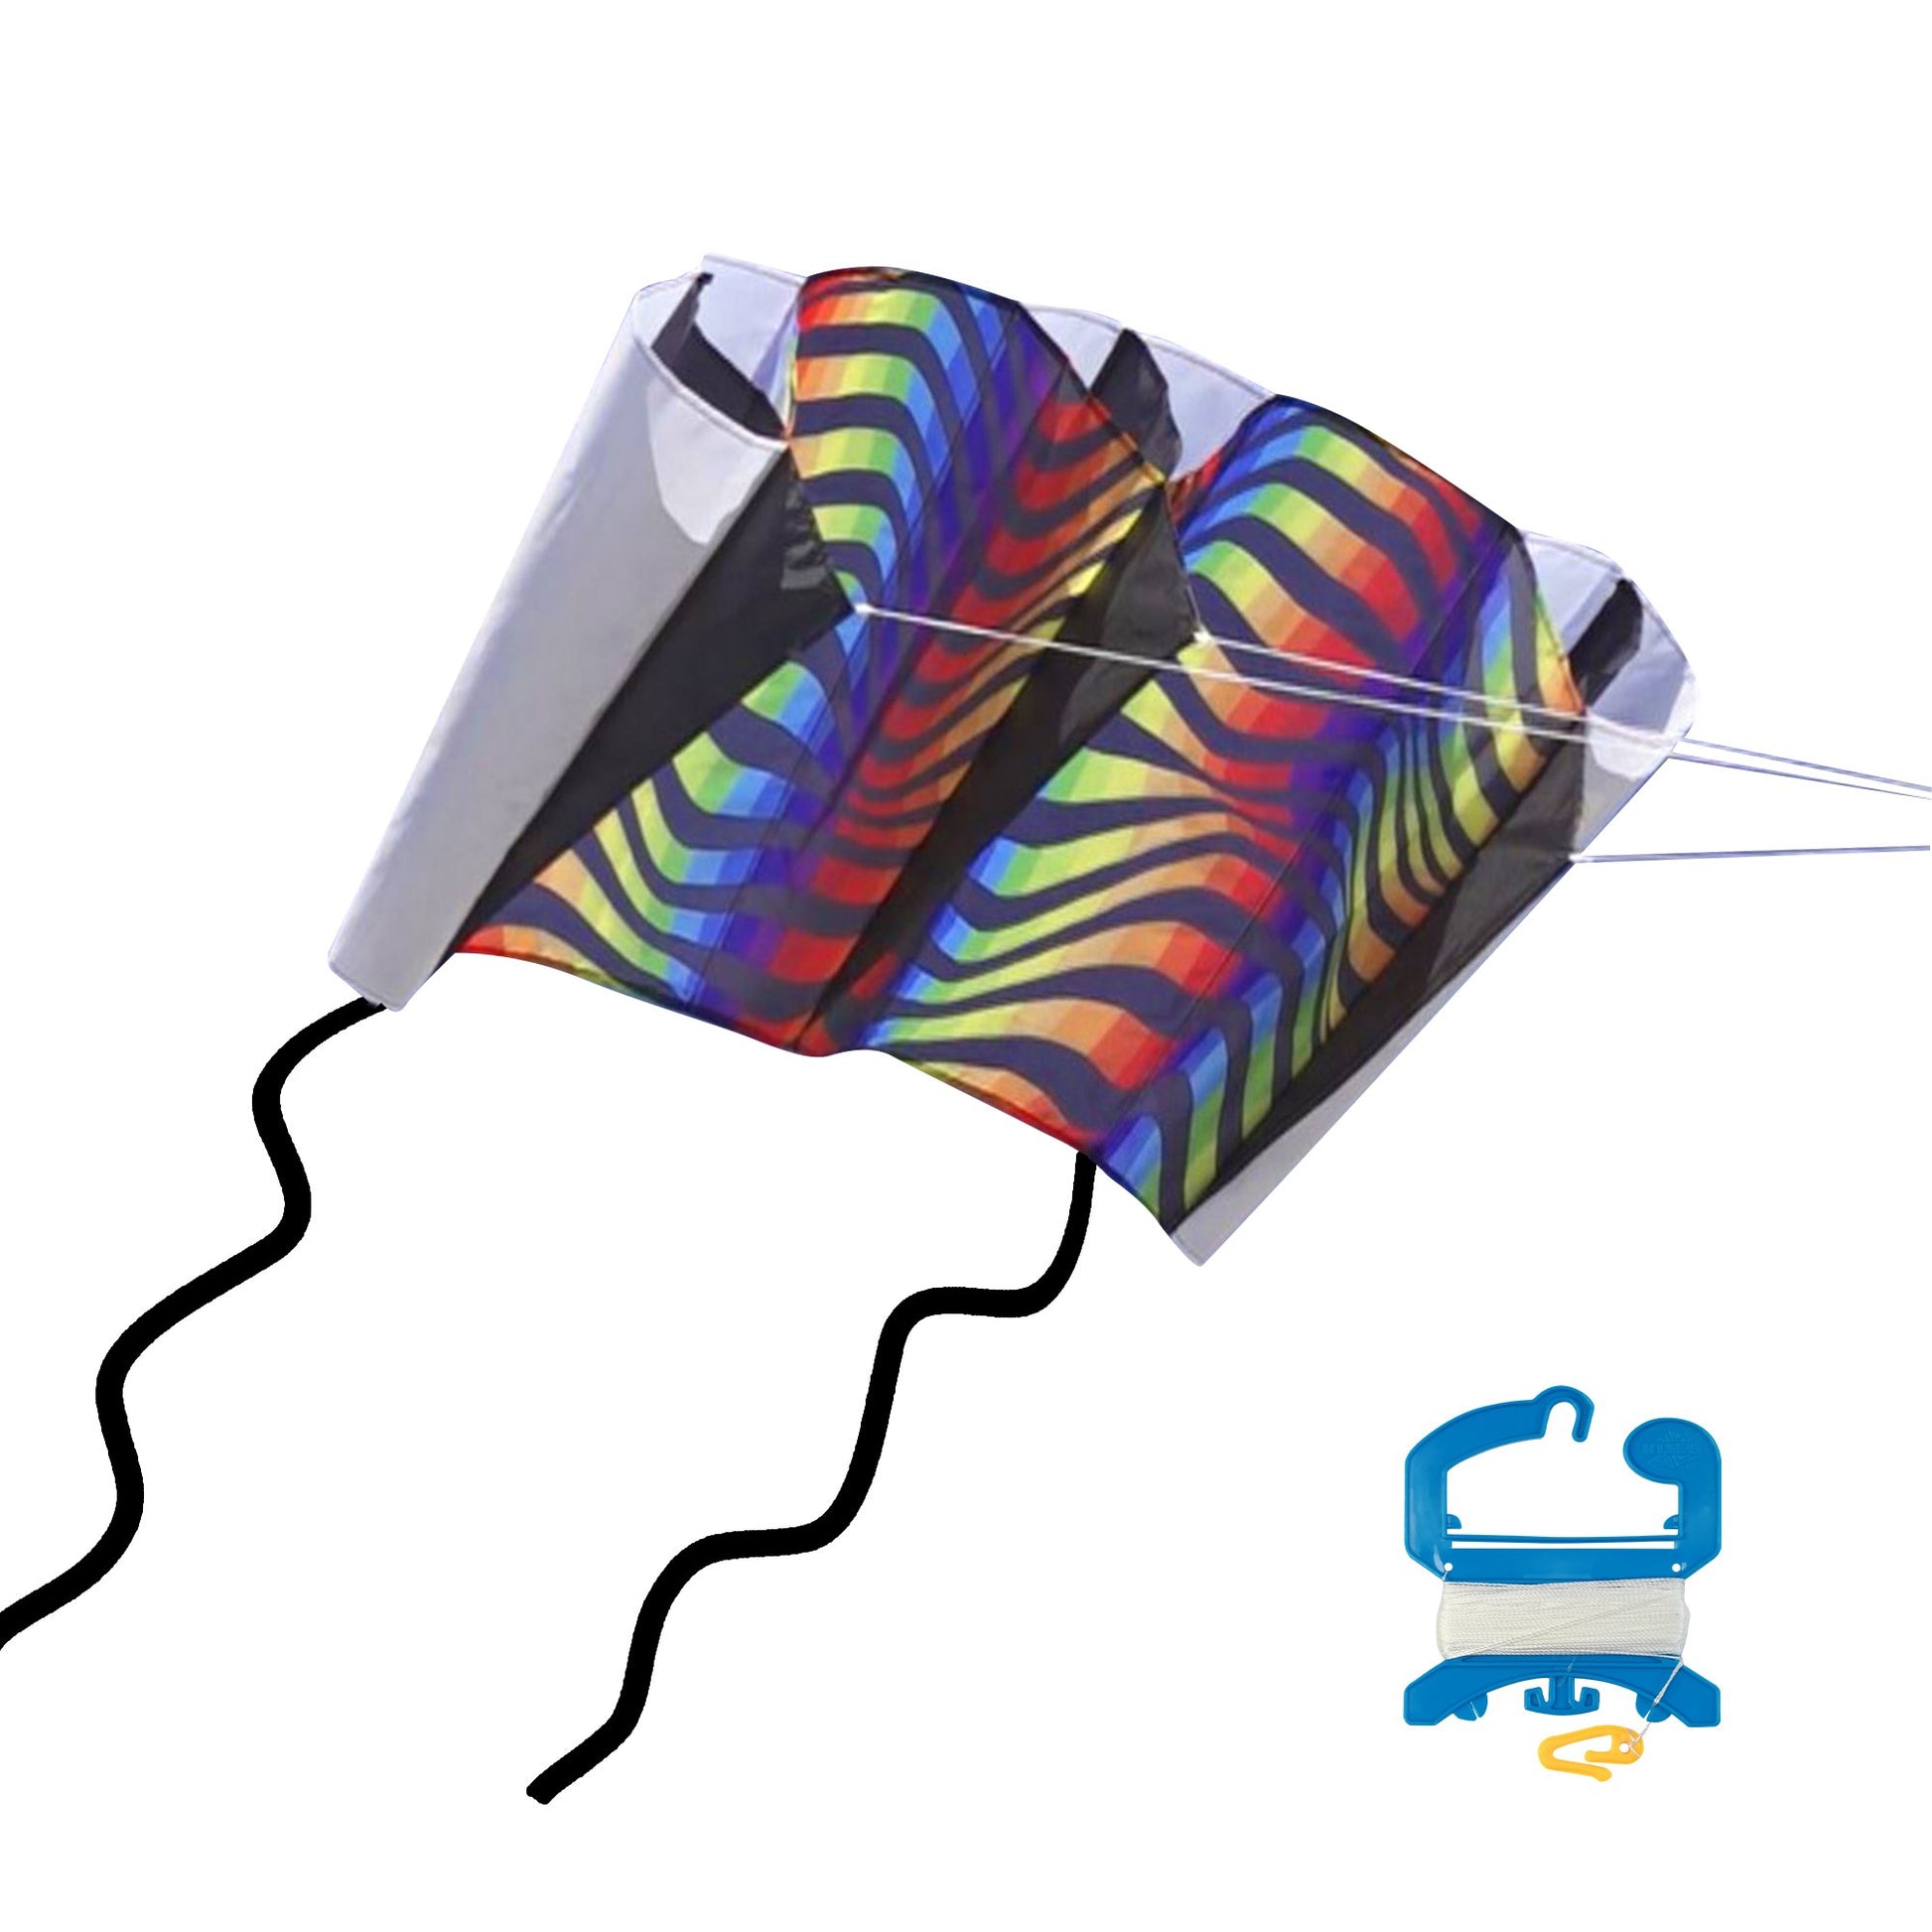 X Kites SkyFoil Waves + Pocket Kite Void Parafoil Kite Bundle - No Assembly Required photo showing handle